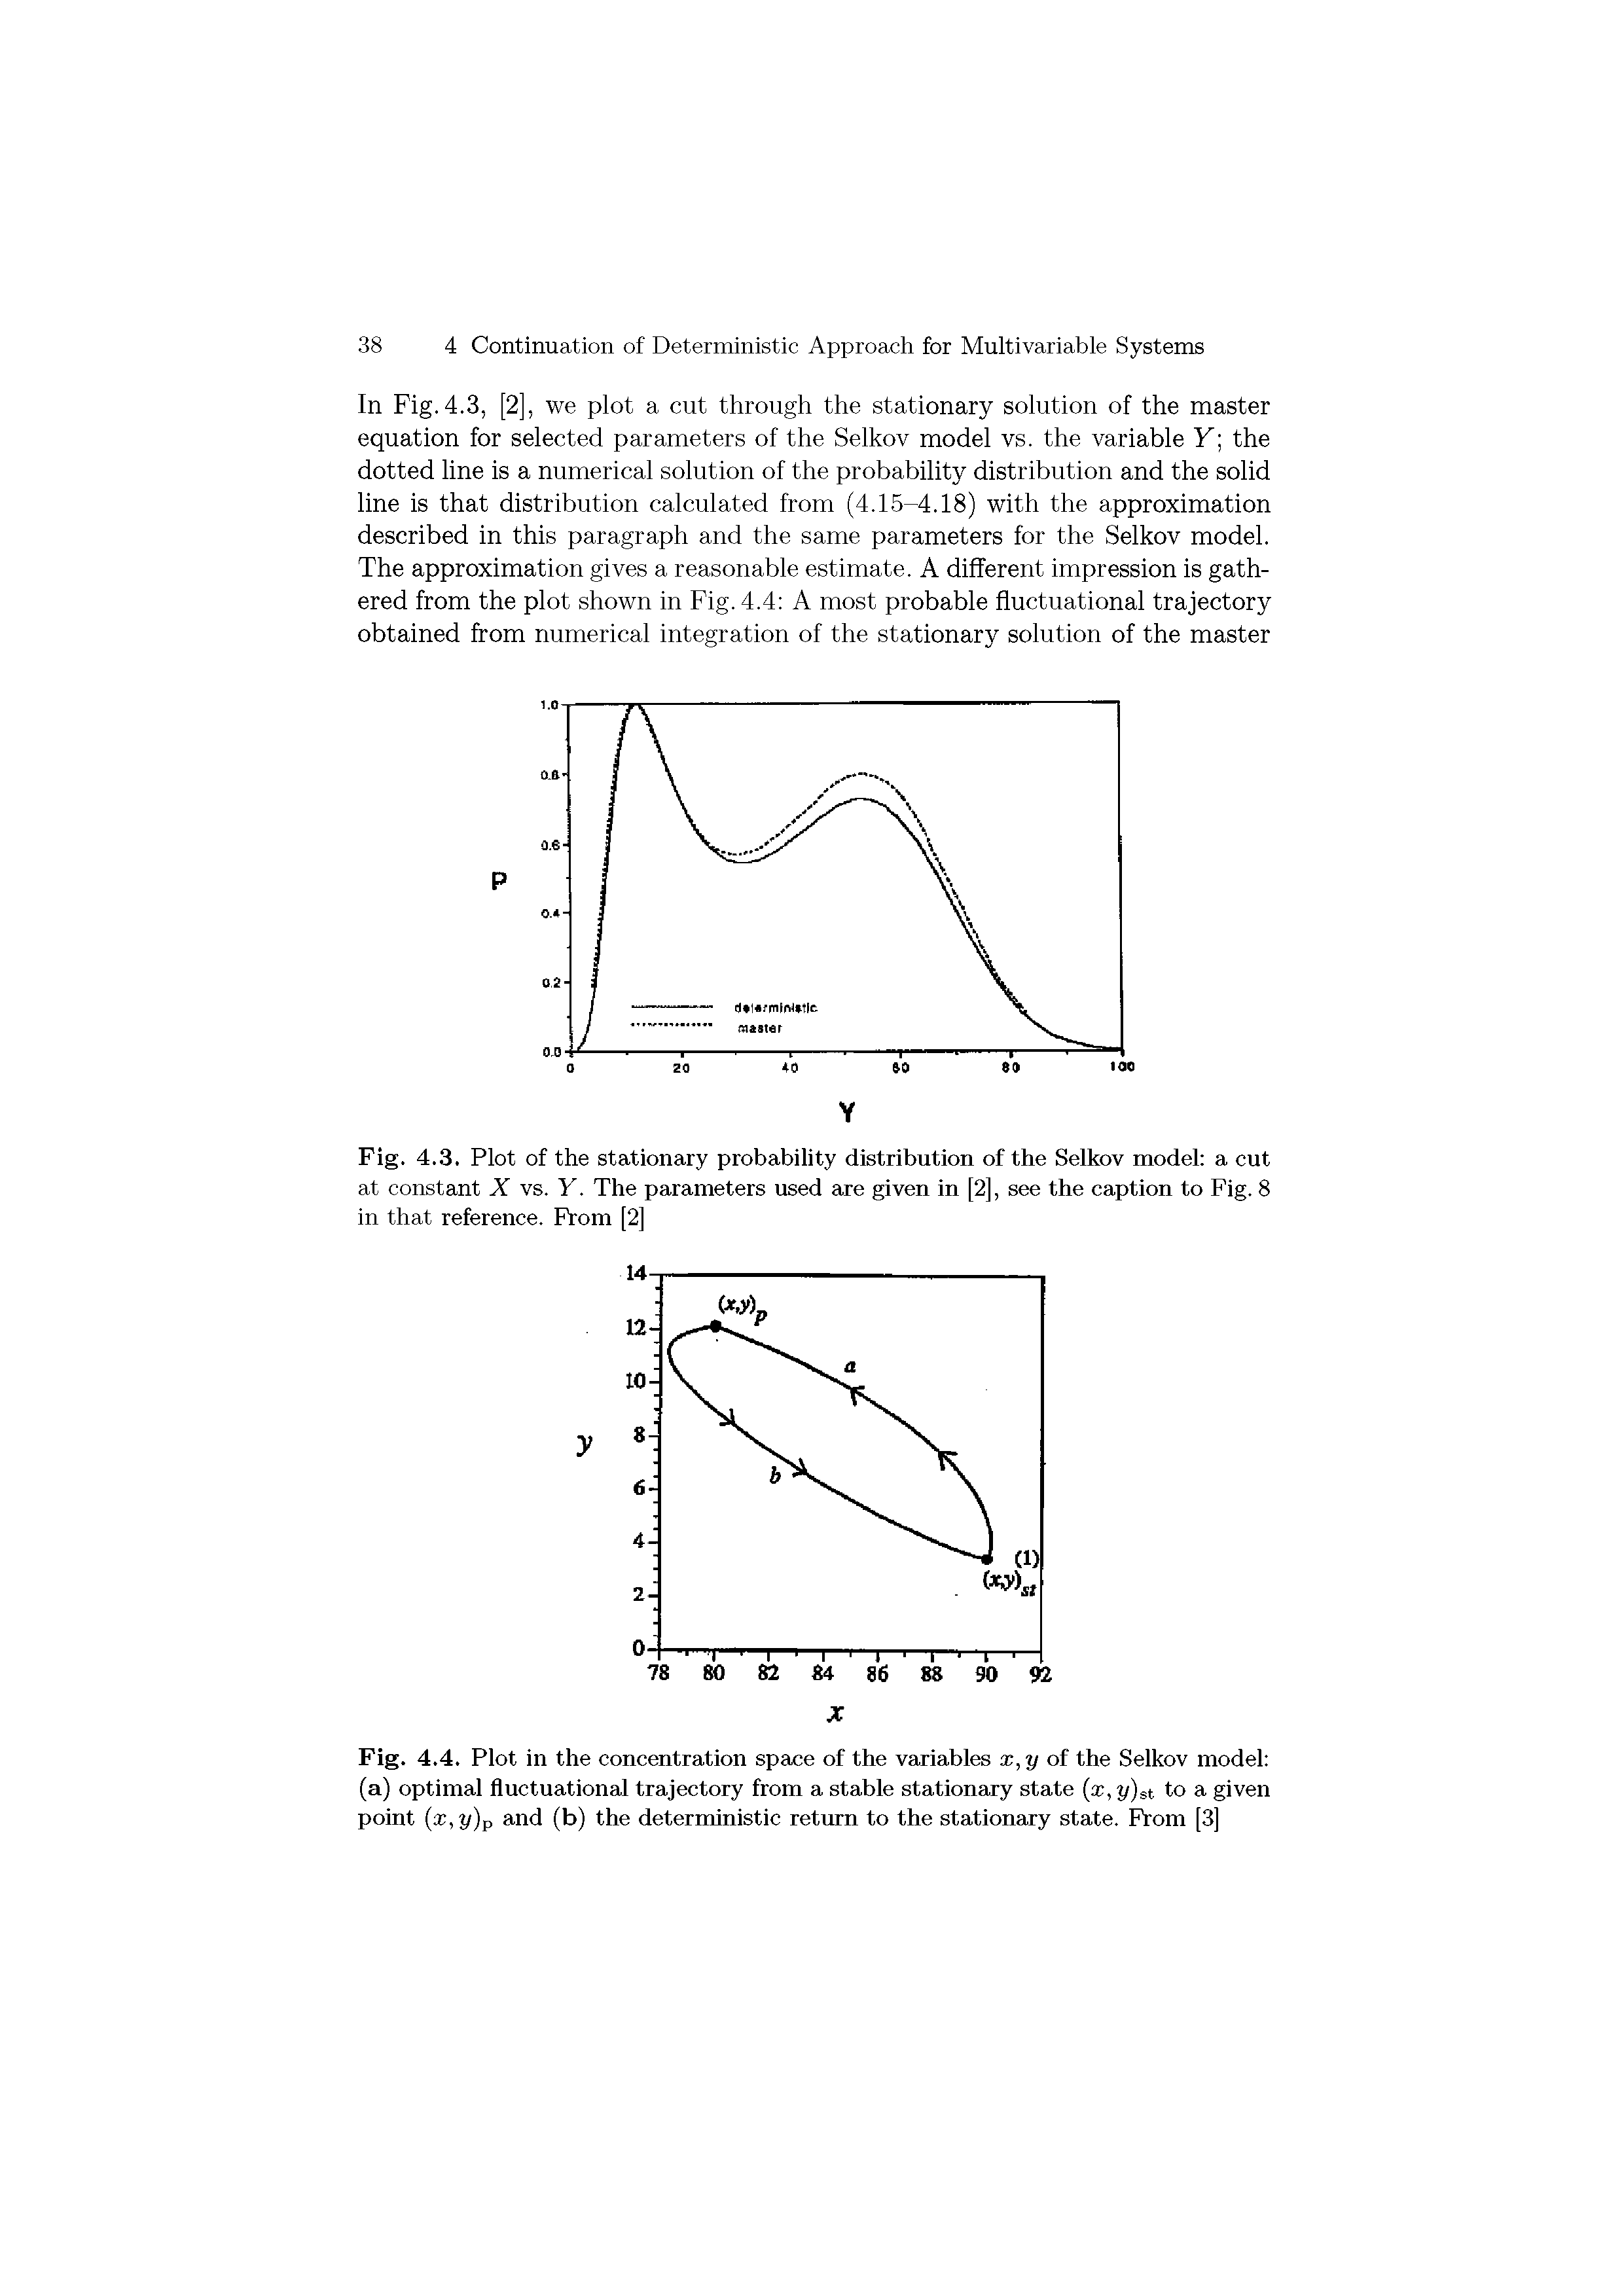 Fig. 4.3. Plot of the stationary probability distribution of the Selkov model a cut at constant X vs. Y. The parameters used are given in [2], see the caption to Fig. 8 in that reference. From [2]...